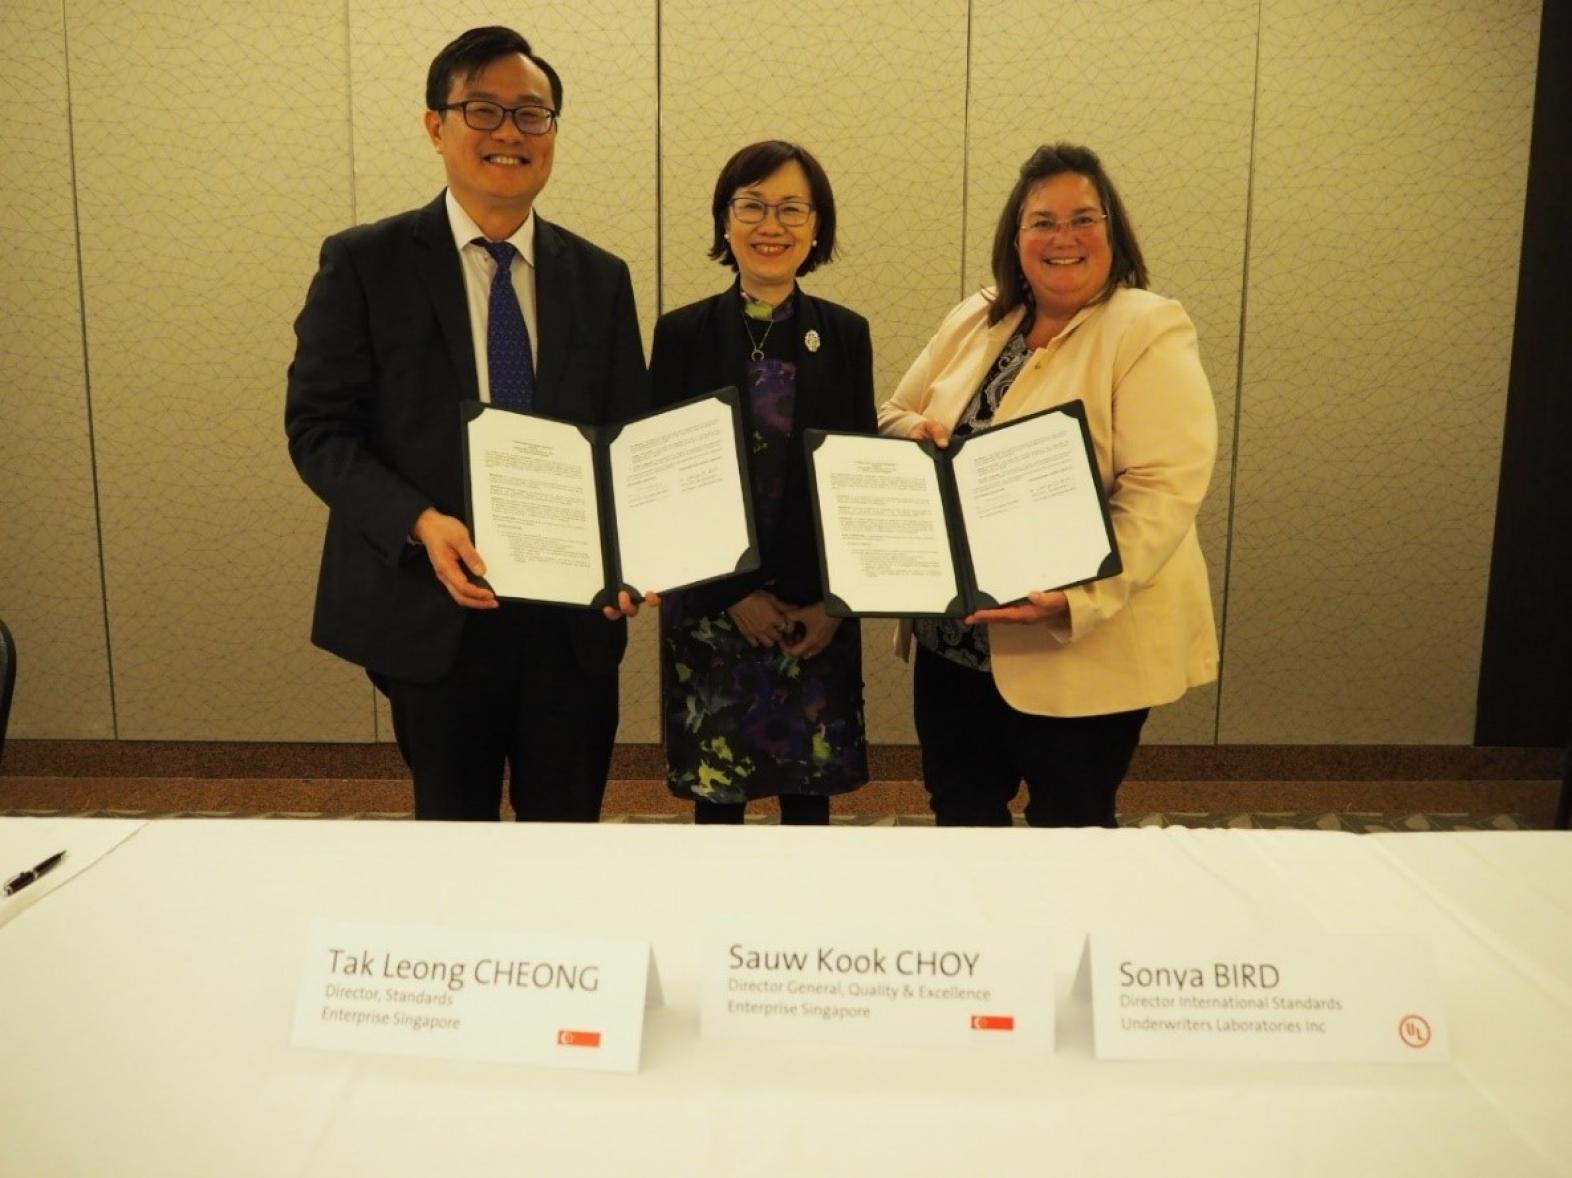 From left to right: Mr. Tak Leong Cheong, Ms. Sauw Kook Choy and Ms. Sonya Bird at MOU signing with Enterprise Singapore